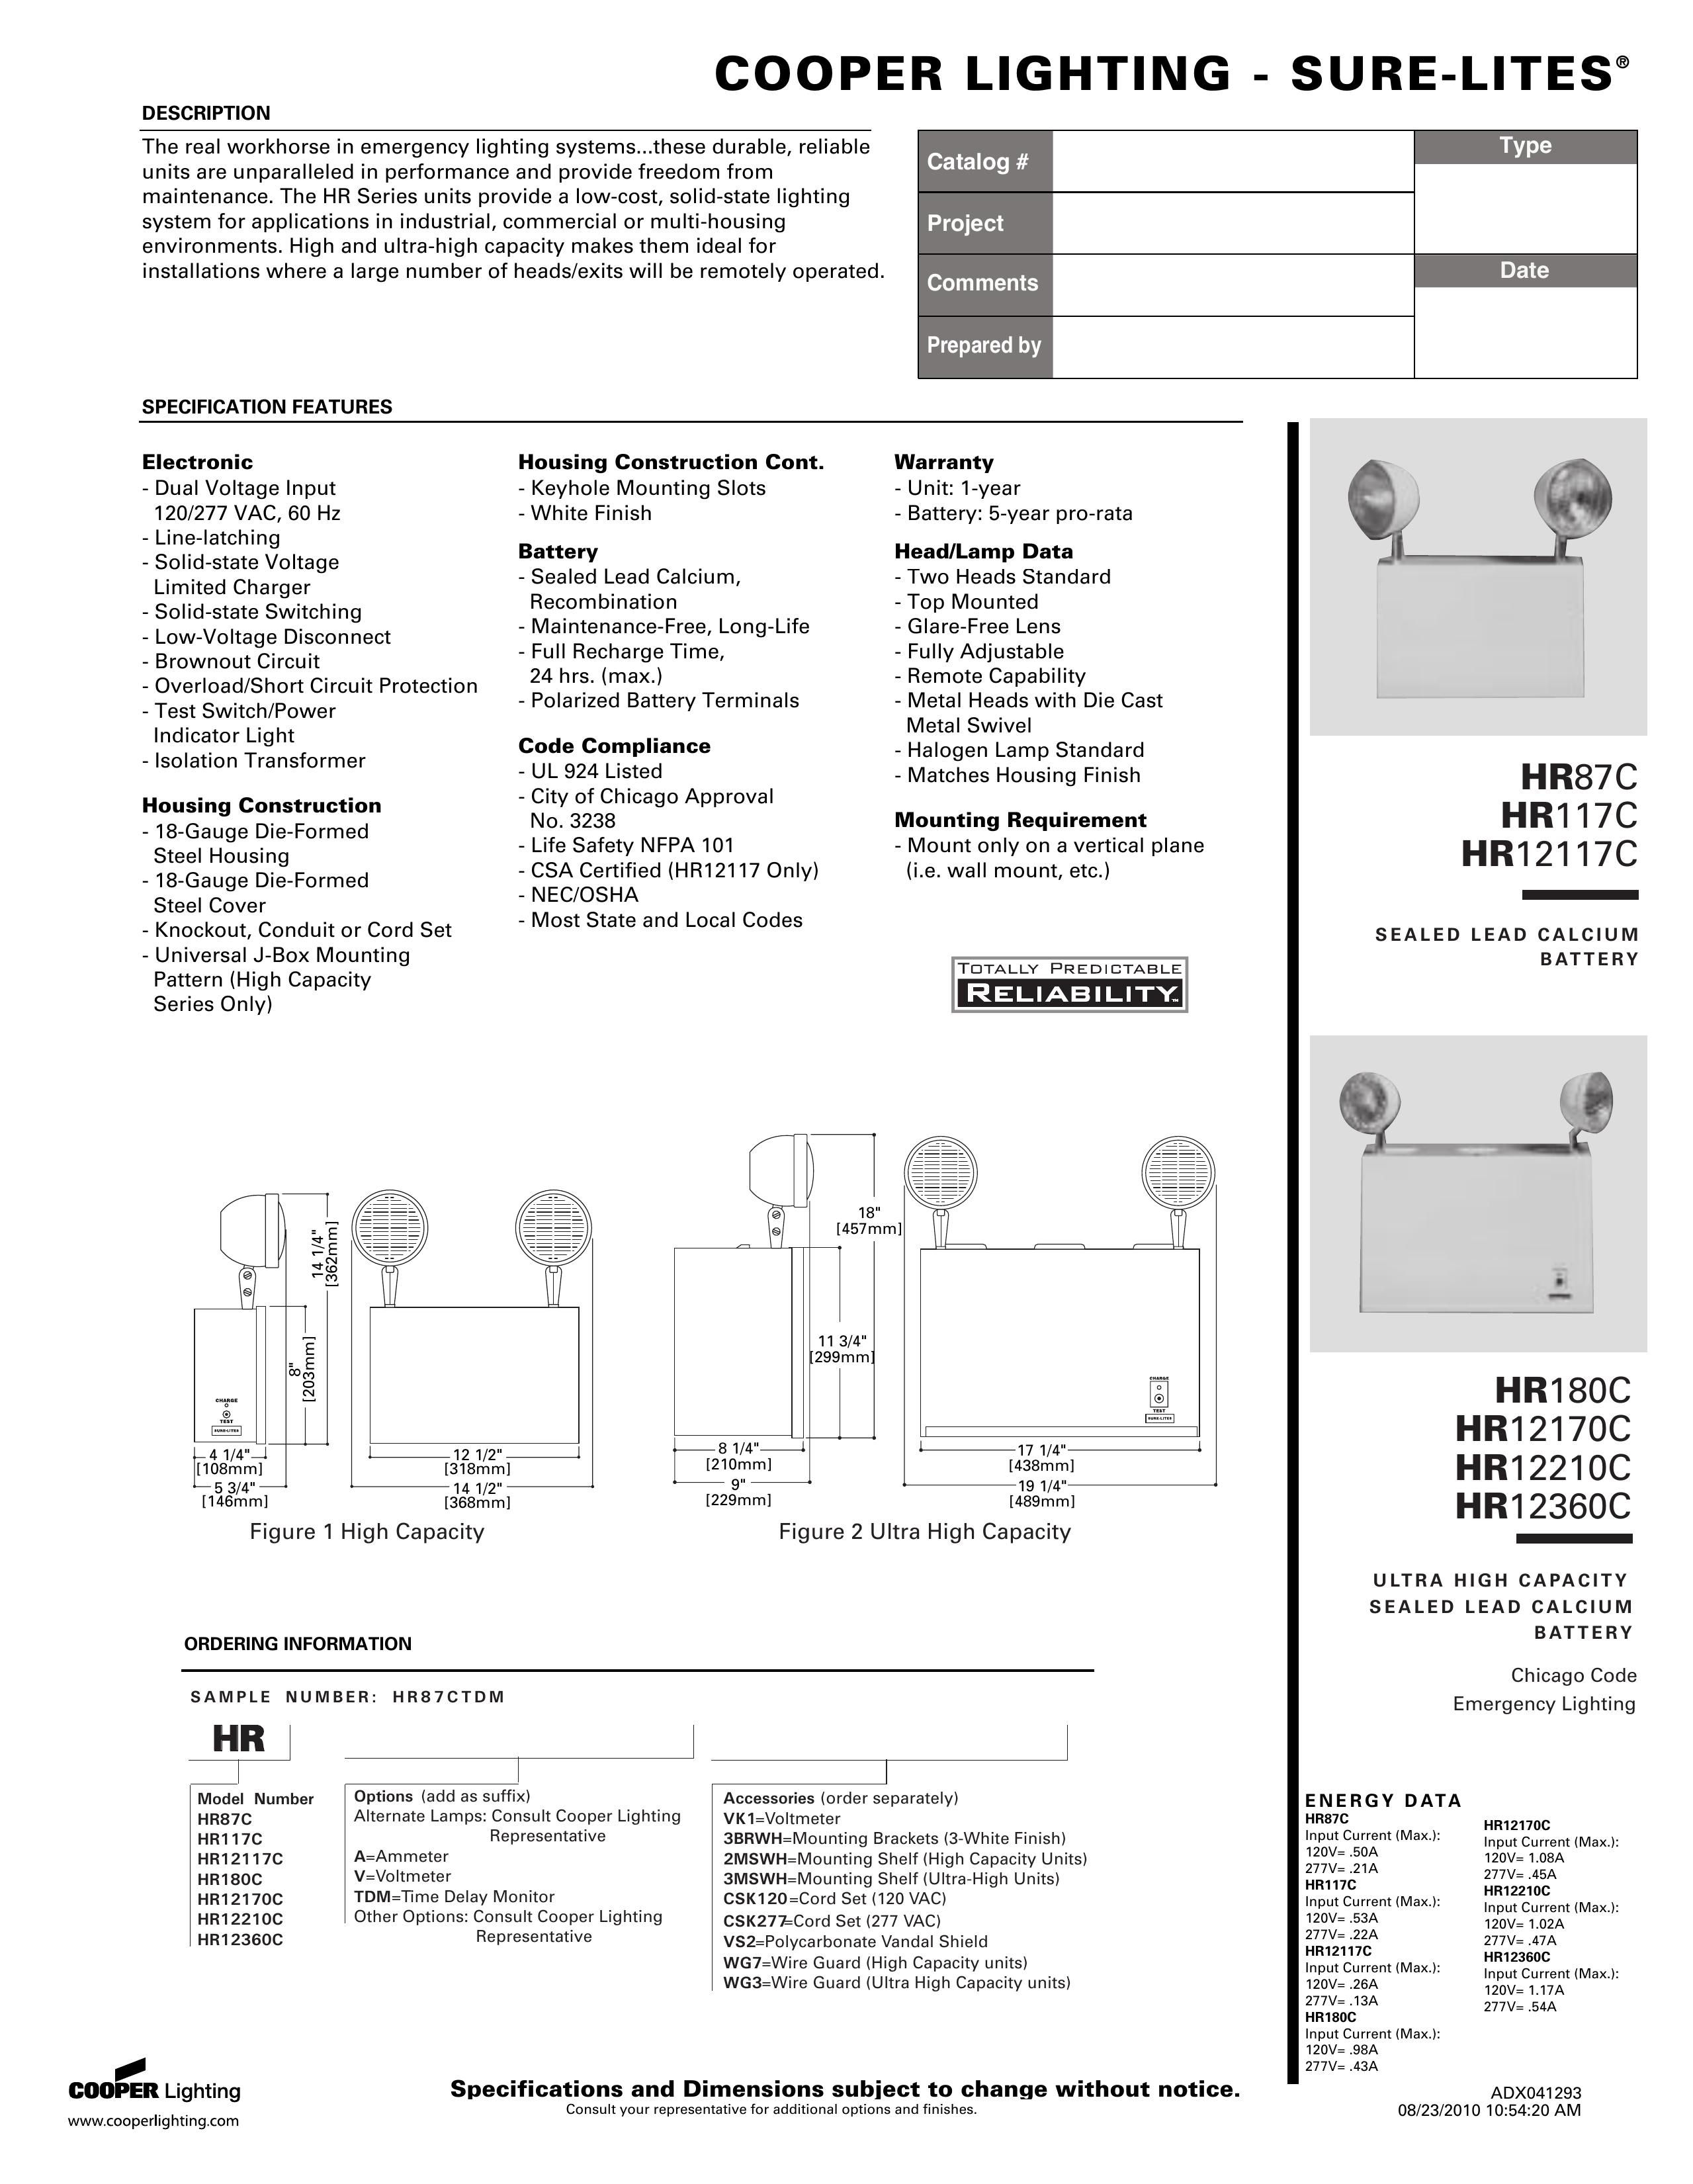 Cooper Lighting HR87C Marine Safety Devices User Manual